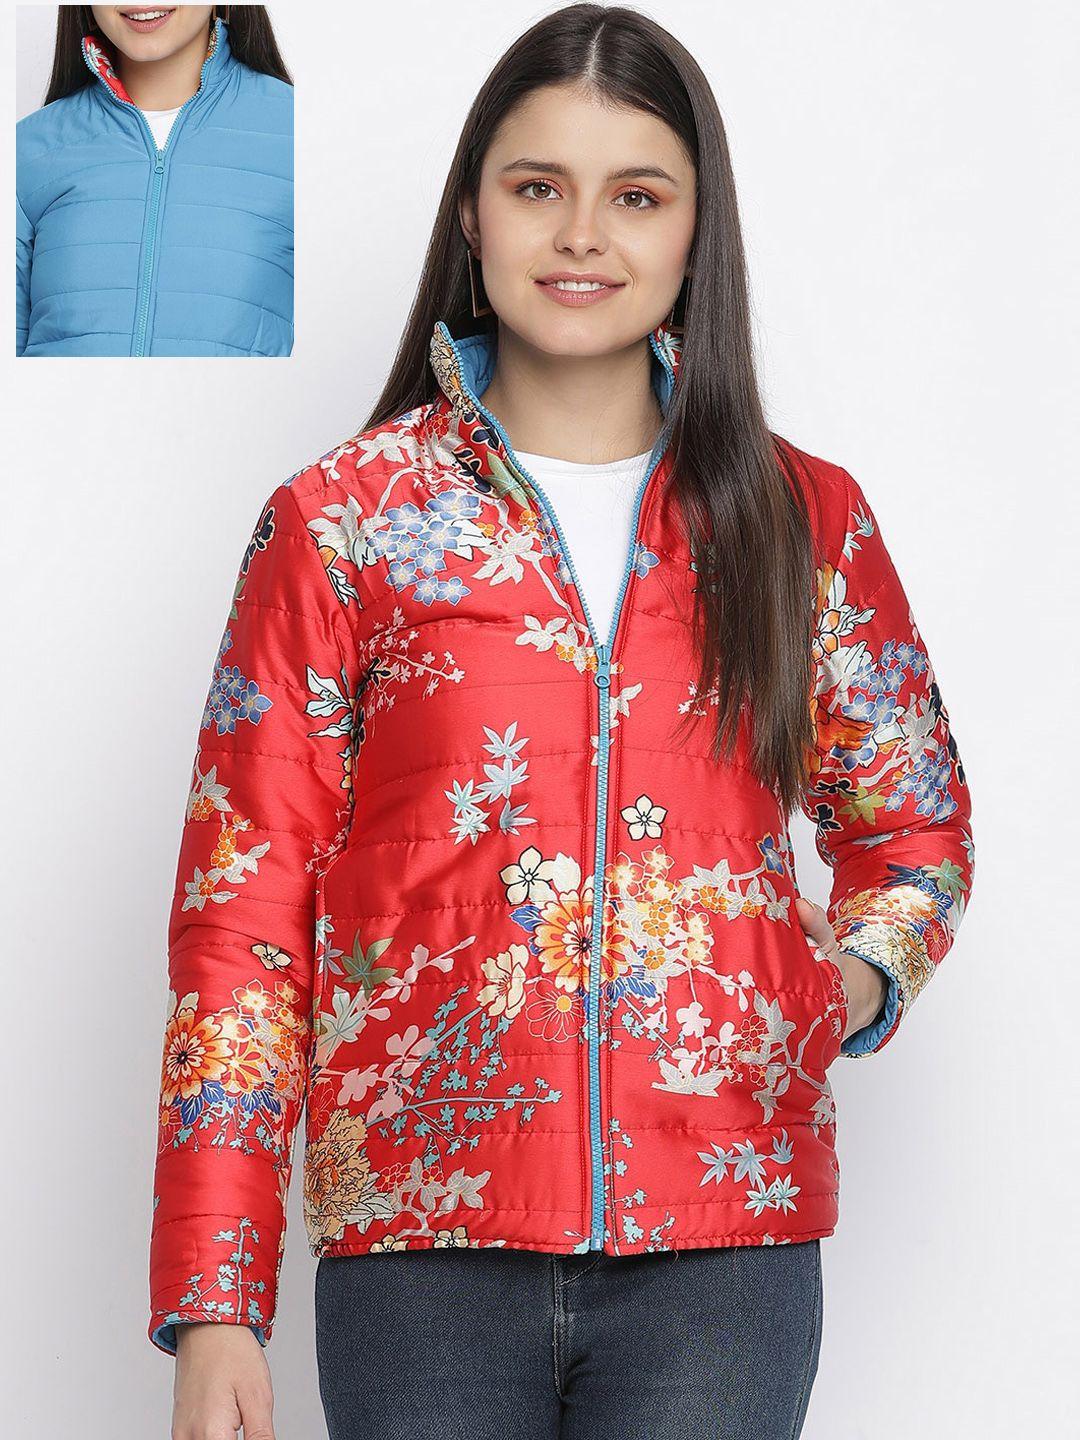 oxolloxo women red & blue floral reversible padded jacket